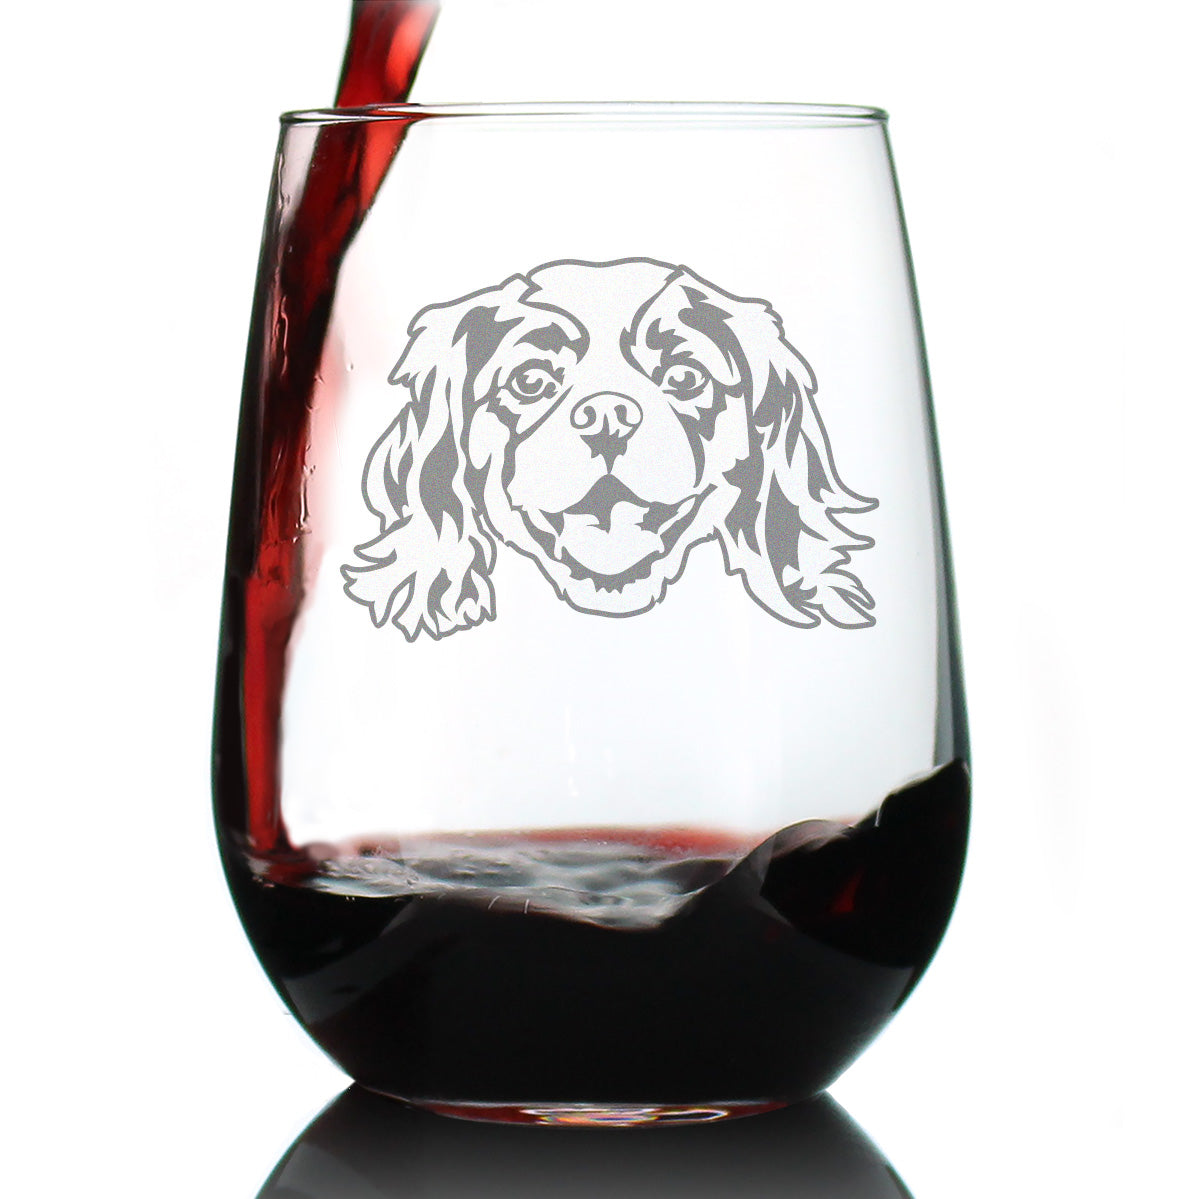 Cavalier King Charles Spaniel Stemless Wine Glass - Cute Dog Themed Decor and Gifts for Moms &amp; Dads of Cavaliers - Large 17 Oz